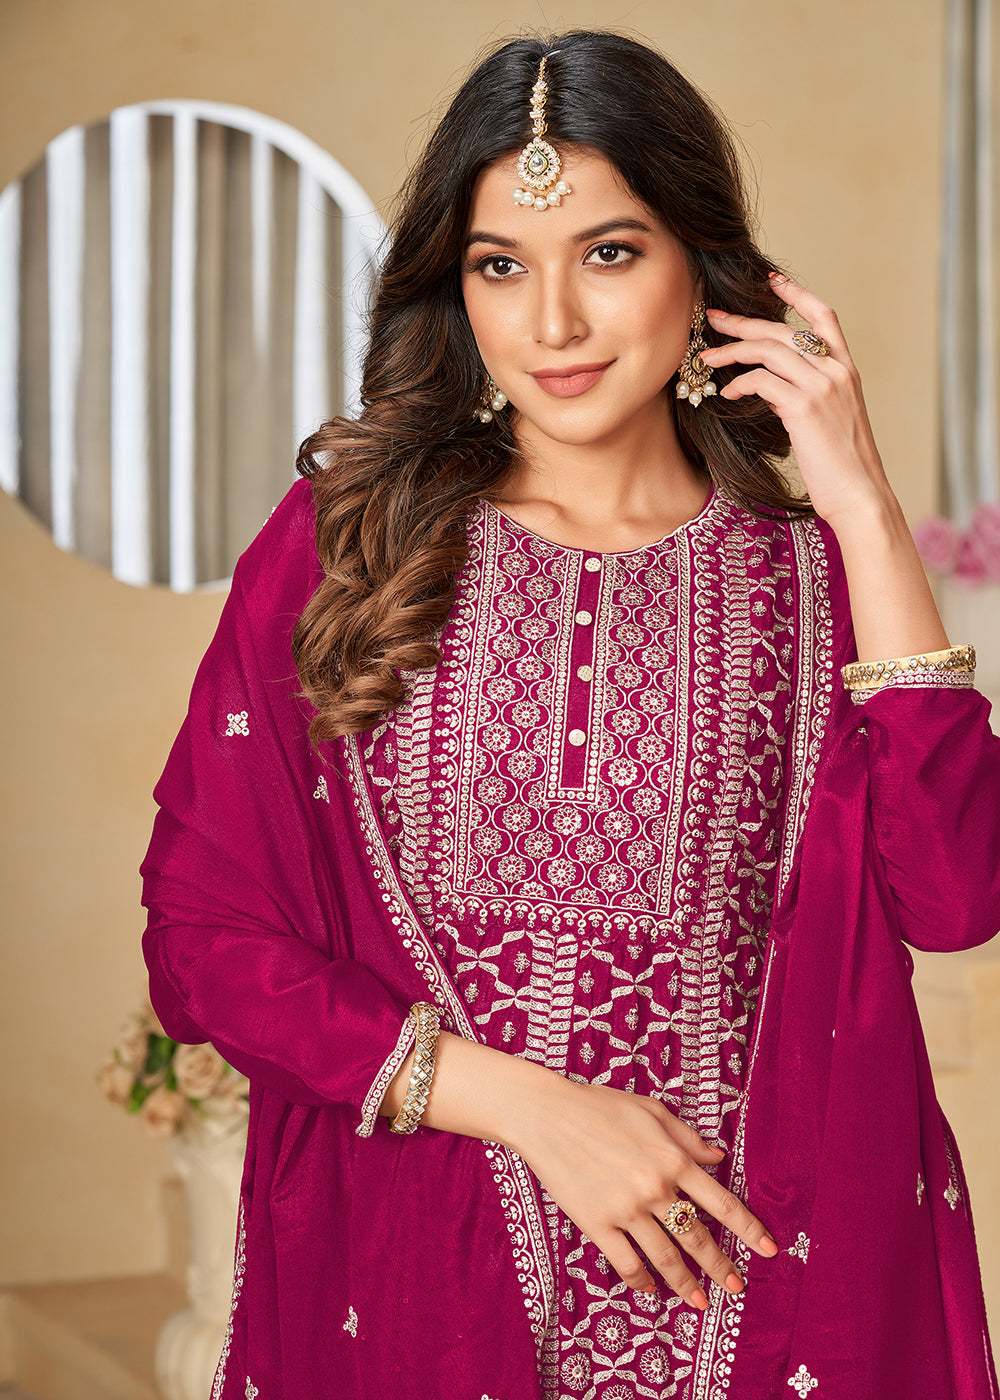 Buy Now Chinnon Rani Pink Embroidered Palazzo Salwar Suit Online in USA, UK, Canada, Germany, Australia & Worldwide at Empress Clothing. 